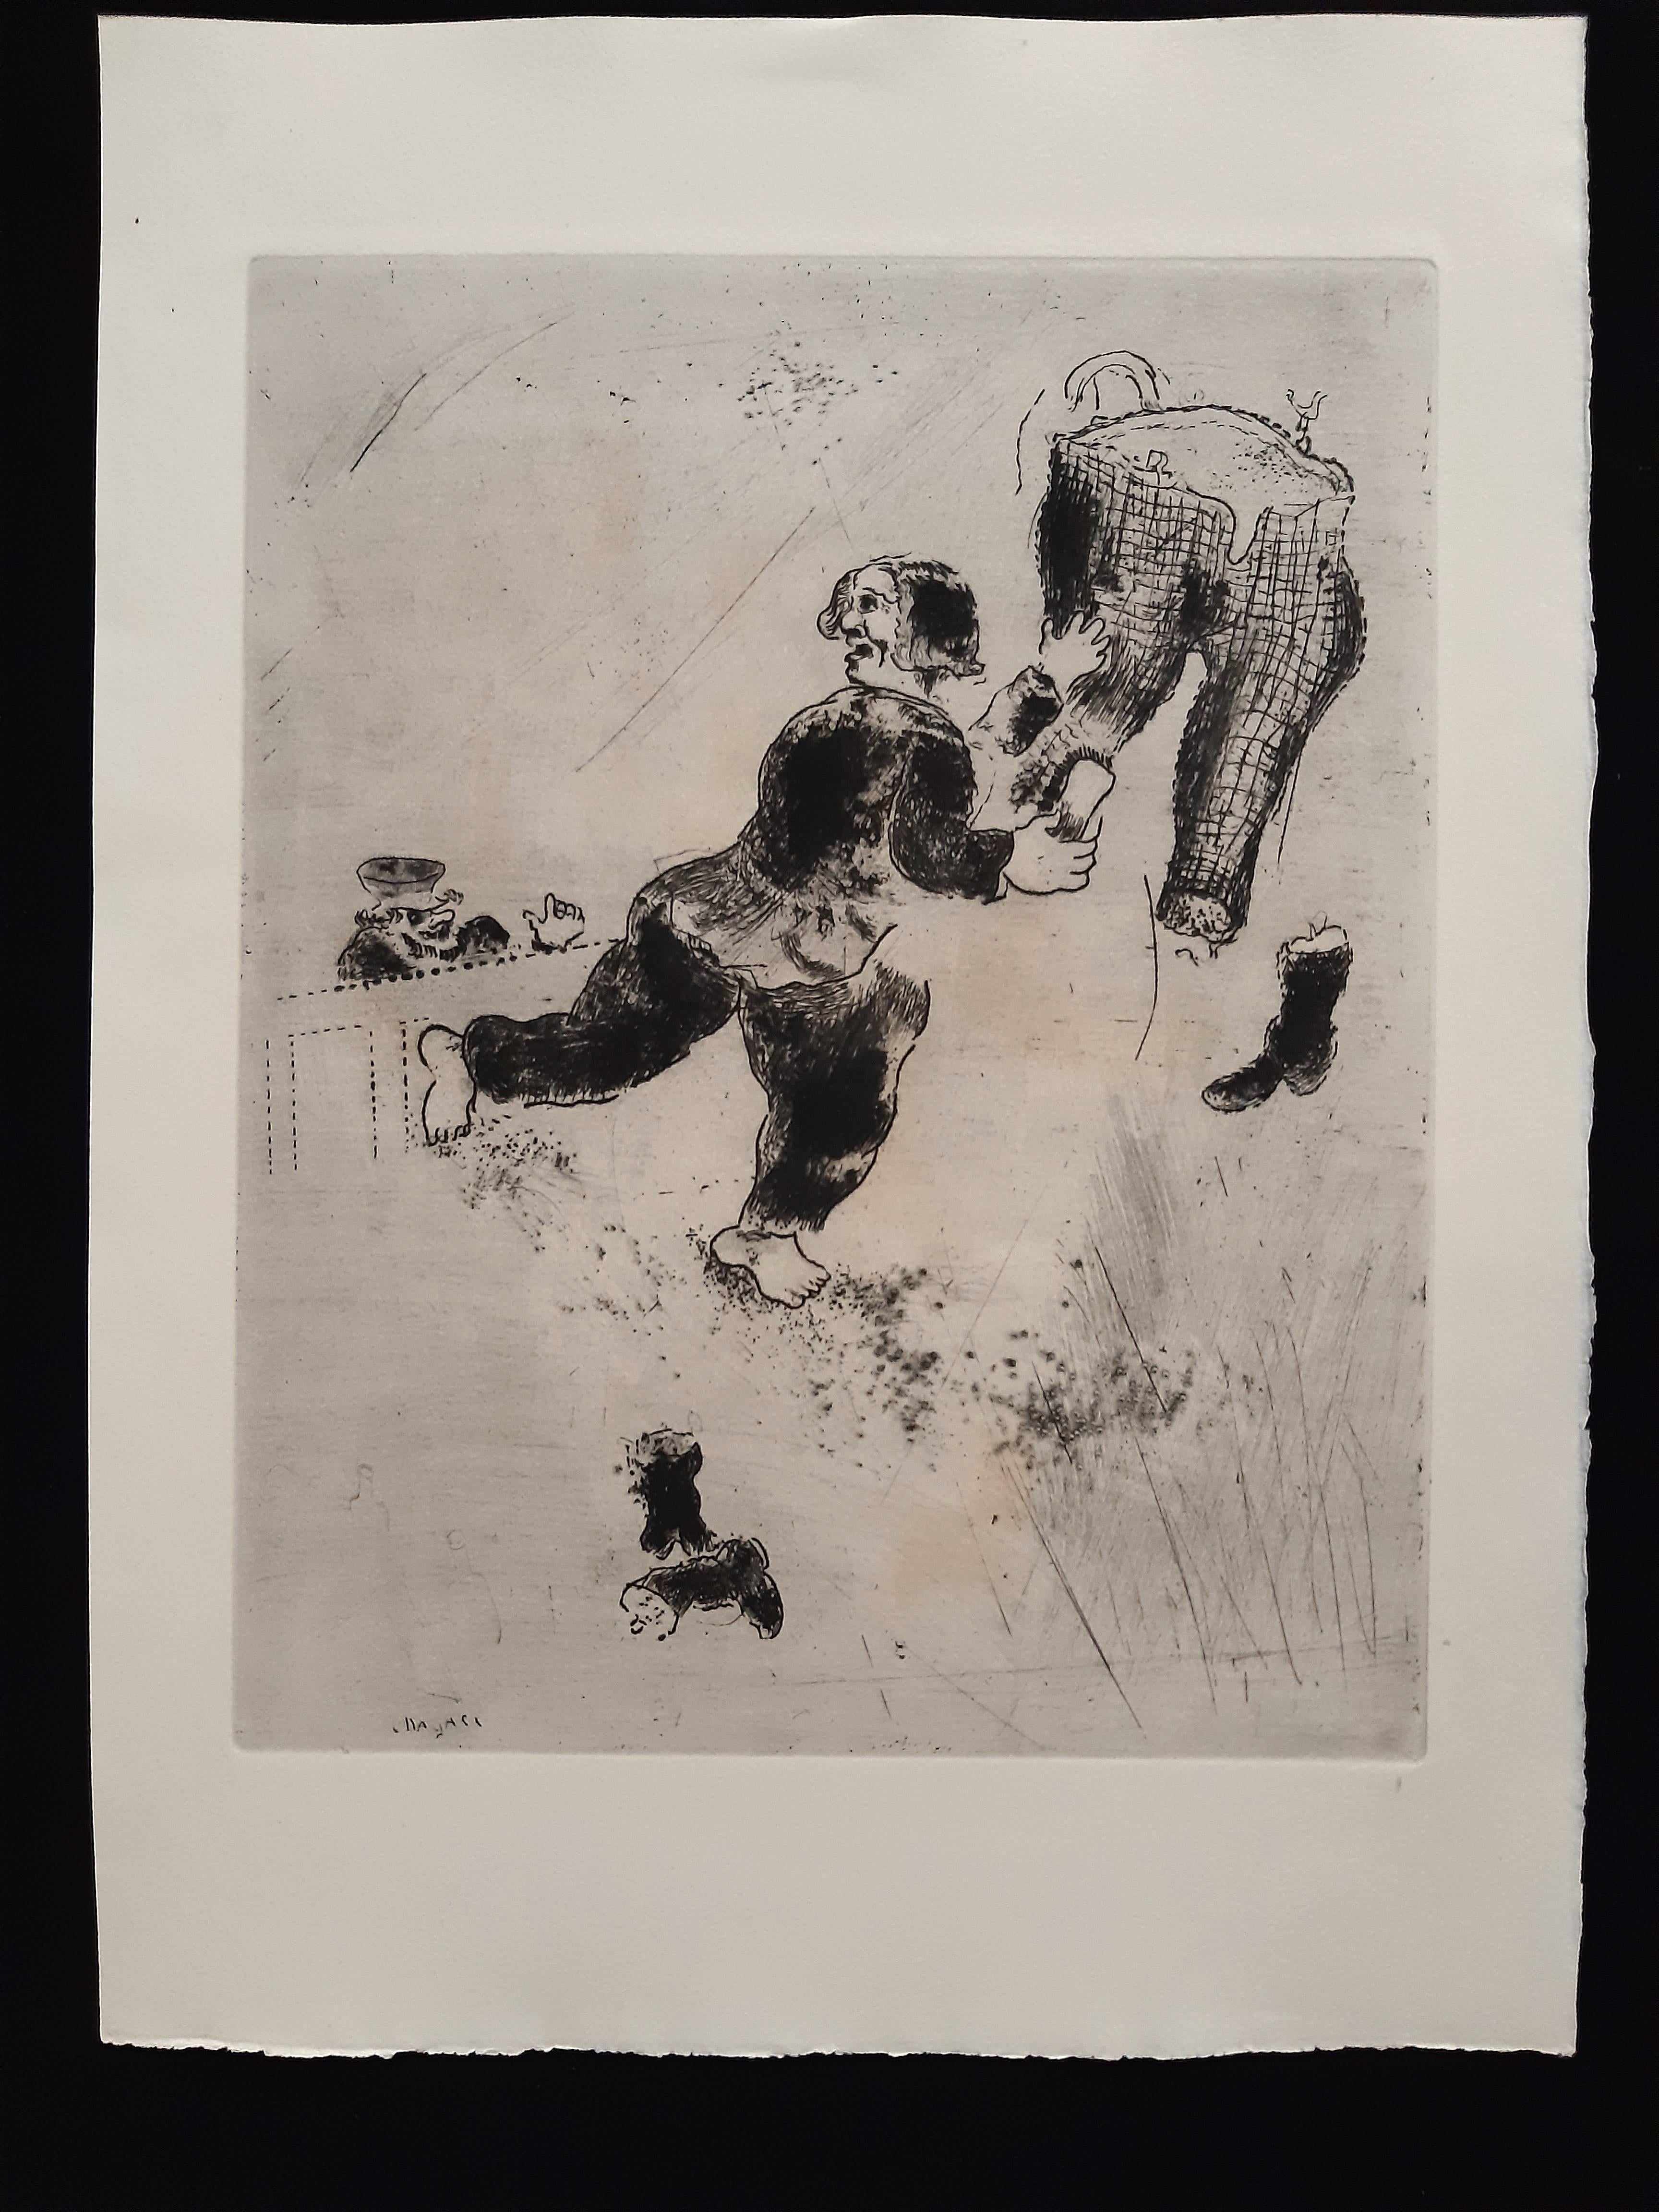 Les Ames Mortes by N. Gogol - Complete Suite by Marc Chagall - 1948  For Sale 6